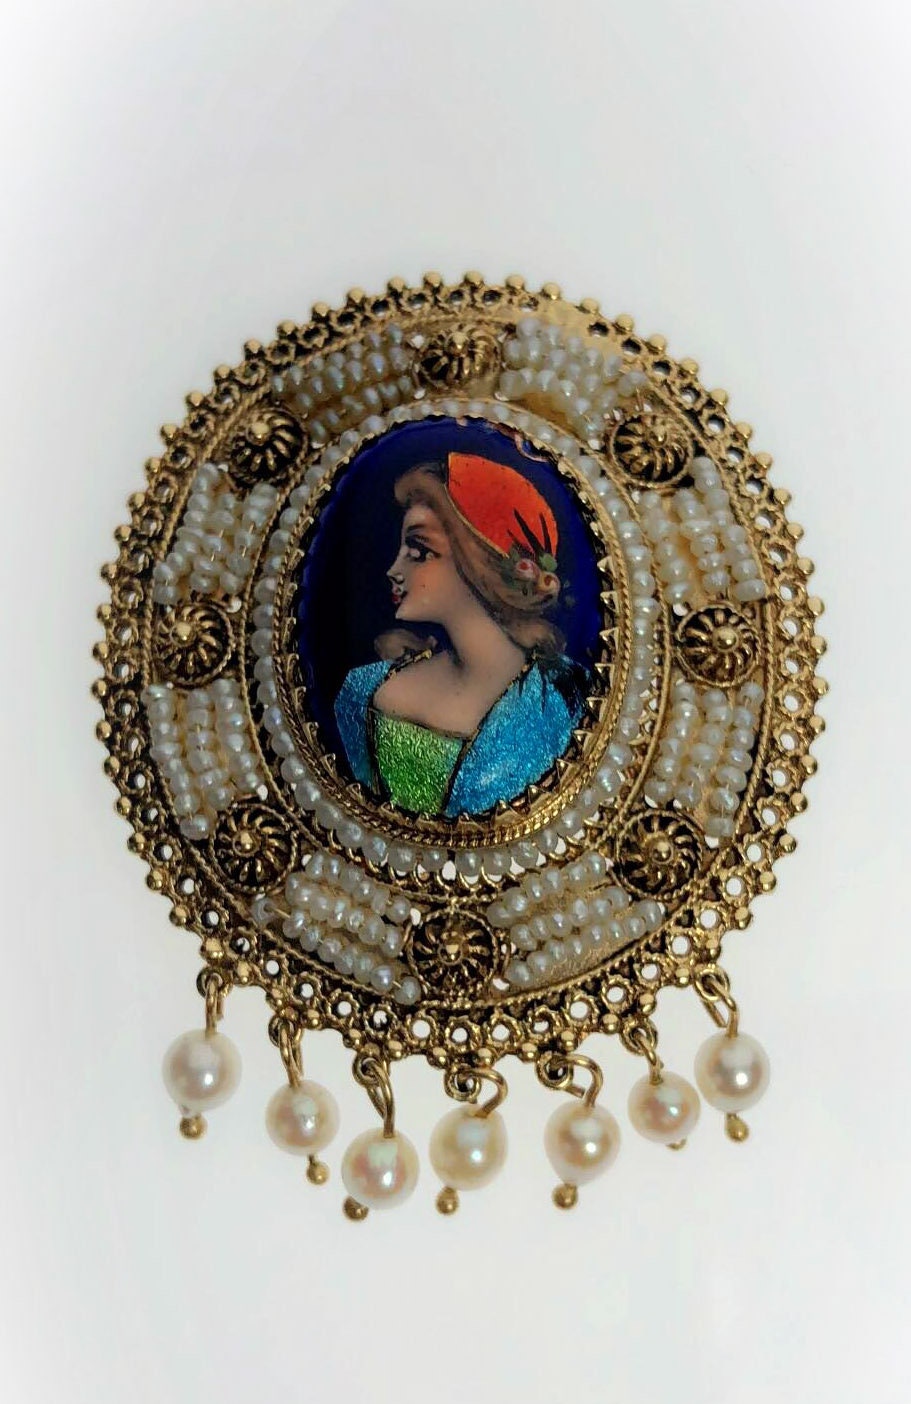 14K Gold Antique French Hand Painted  Cloisonne Limoges Cameo Pendant Brooch with Seed Pearls